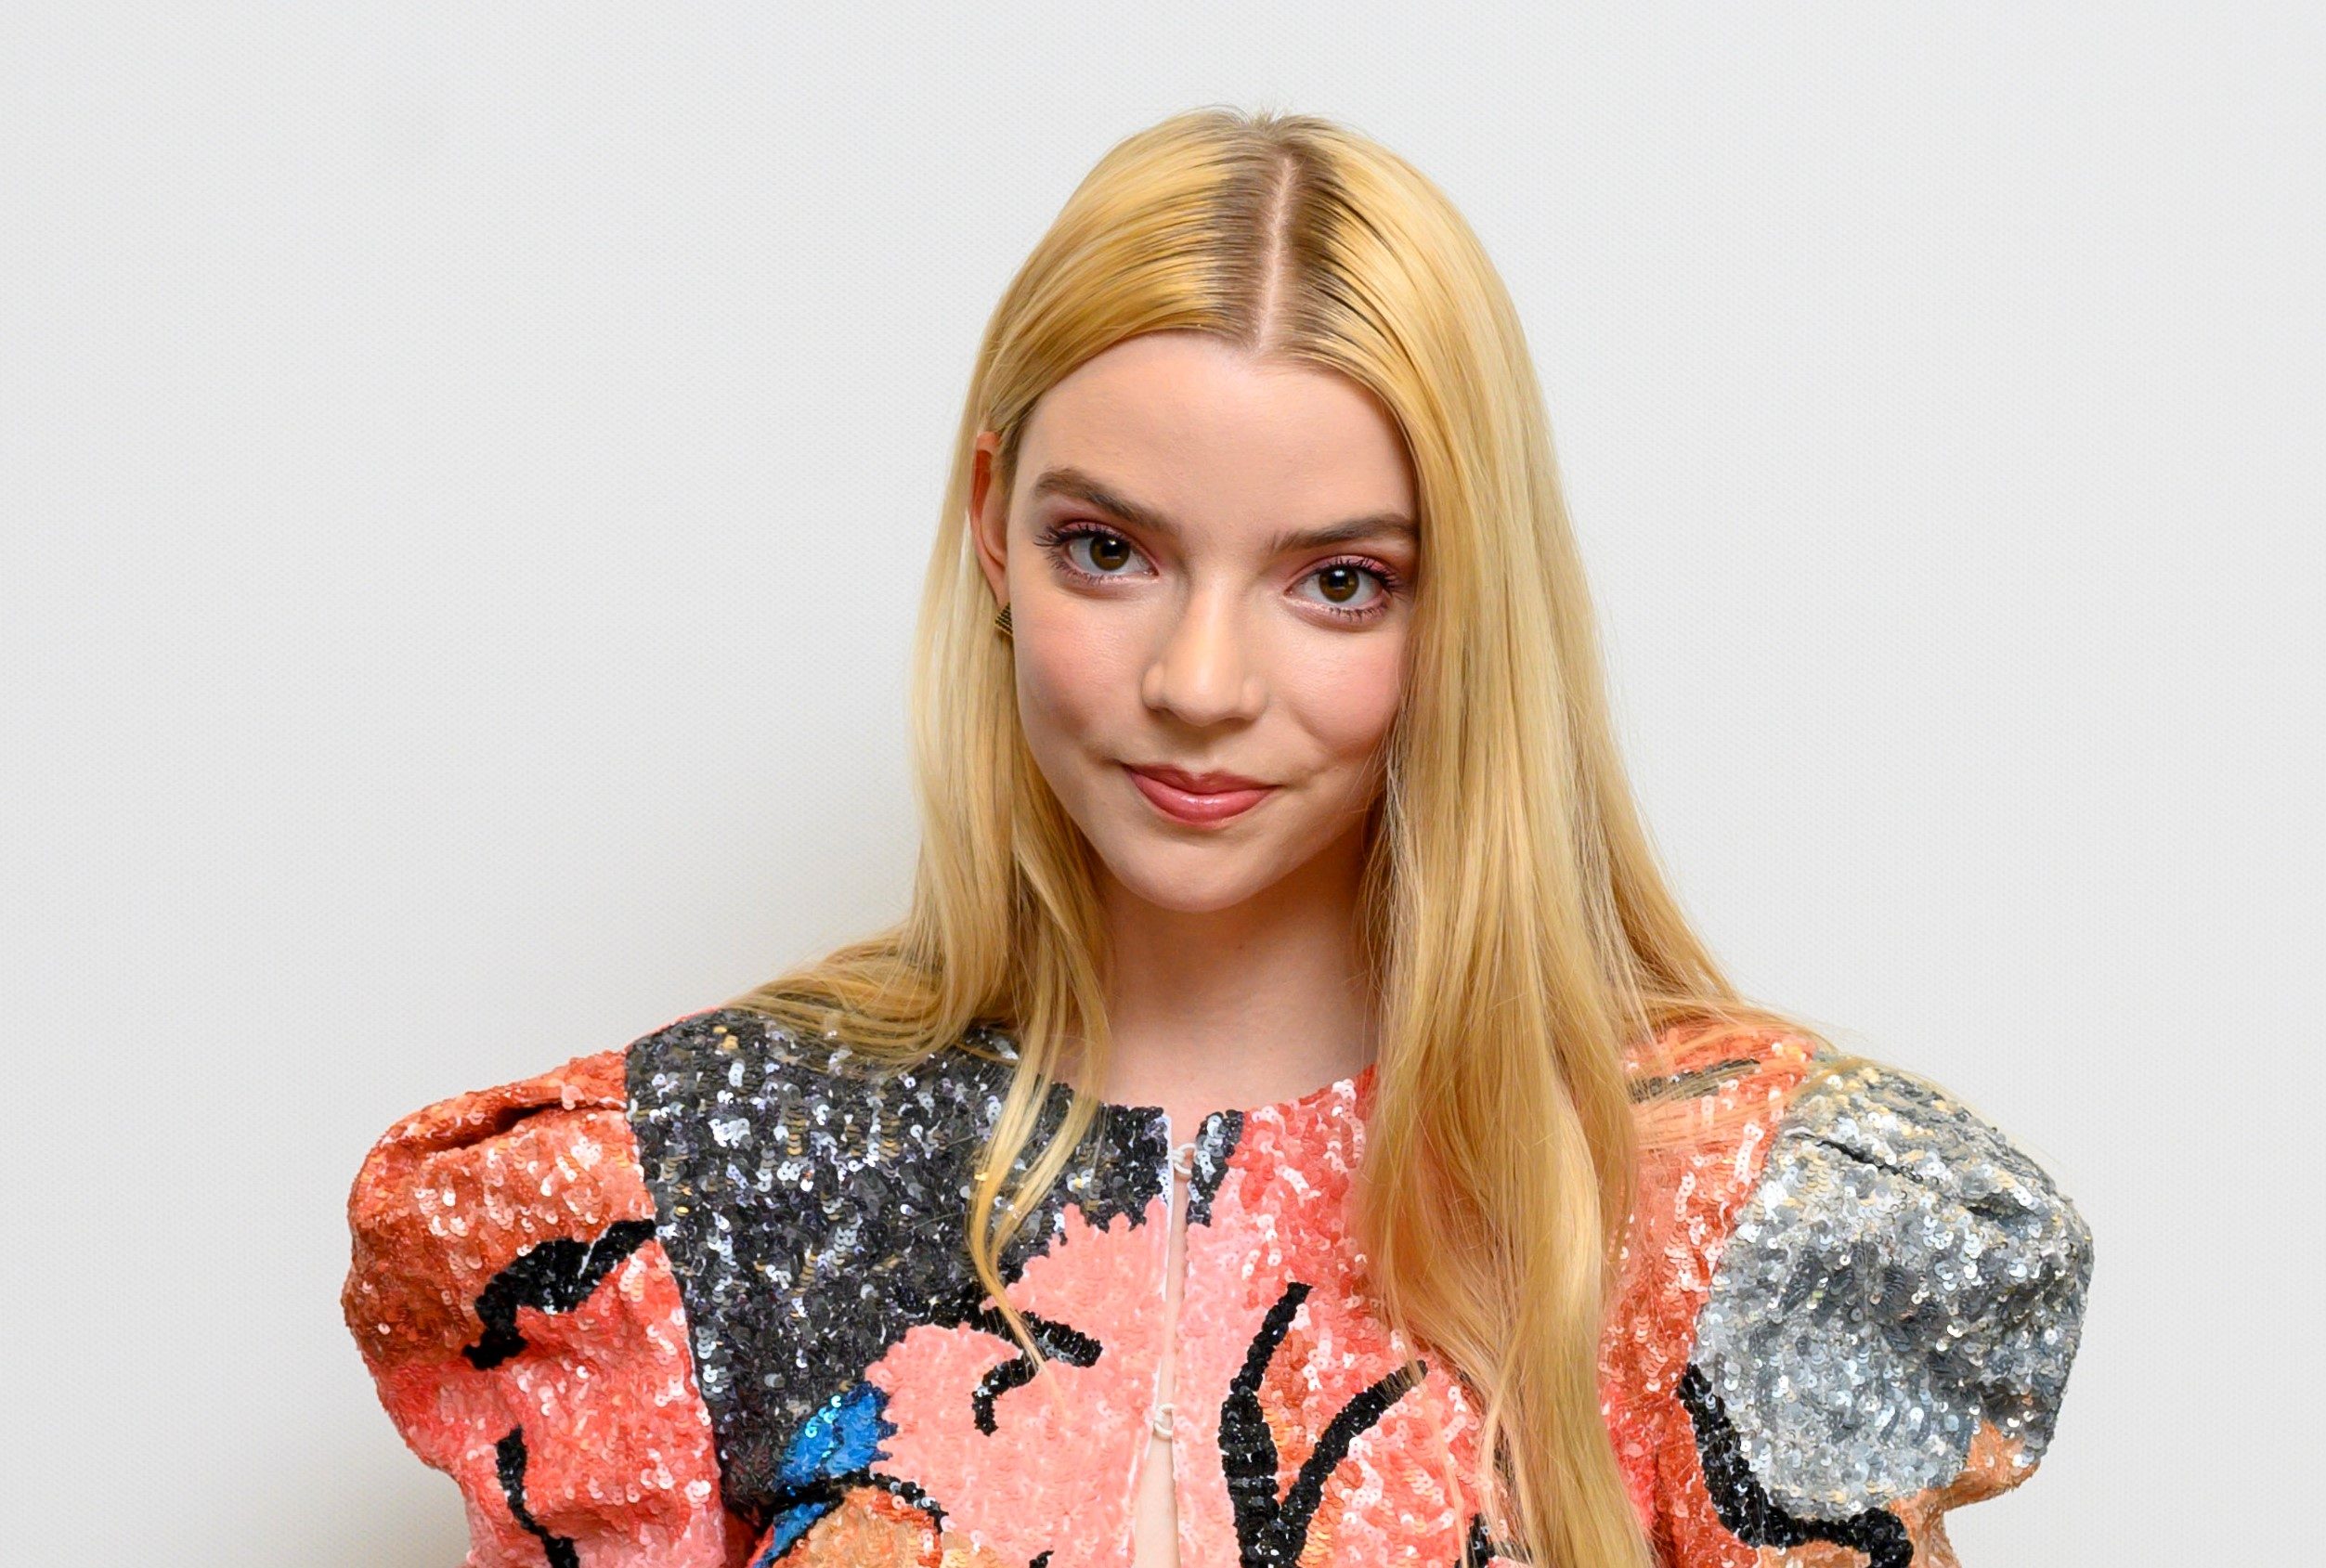 How Anya Taylor-Joy Learned to Soothe Herself - The New York Times